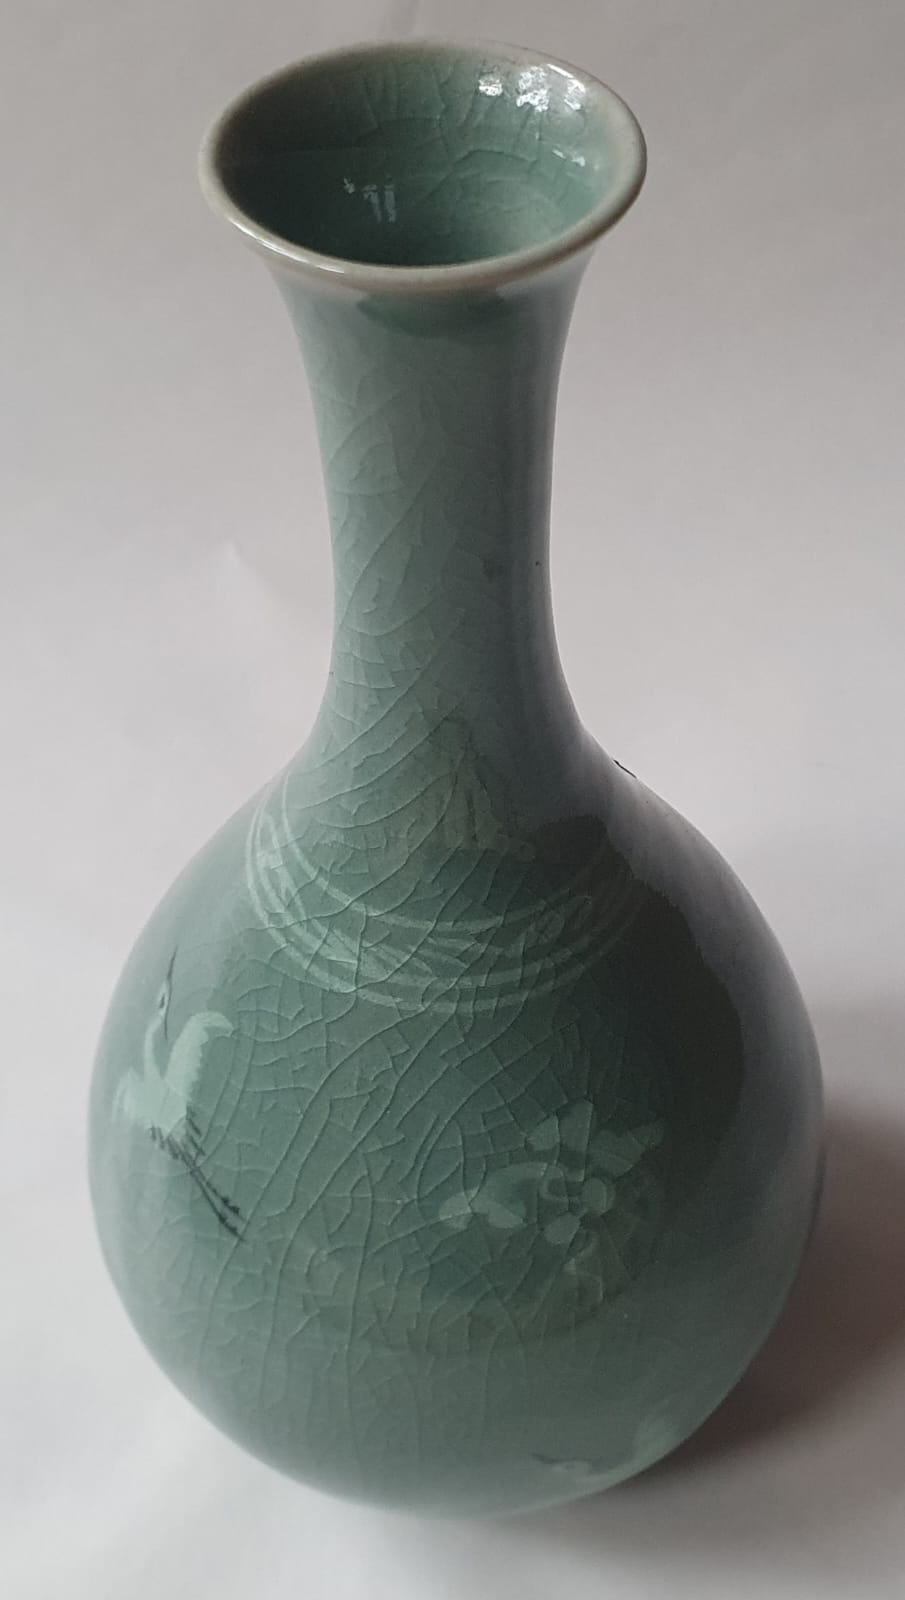 A Korean celadon glazed biottle vase decorated with a small crane & floral sprigs, 7.5" high. - Image 4 of 5